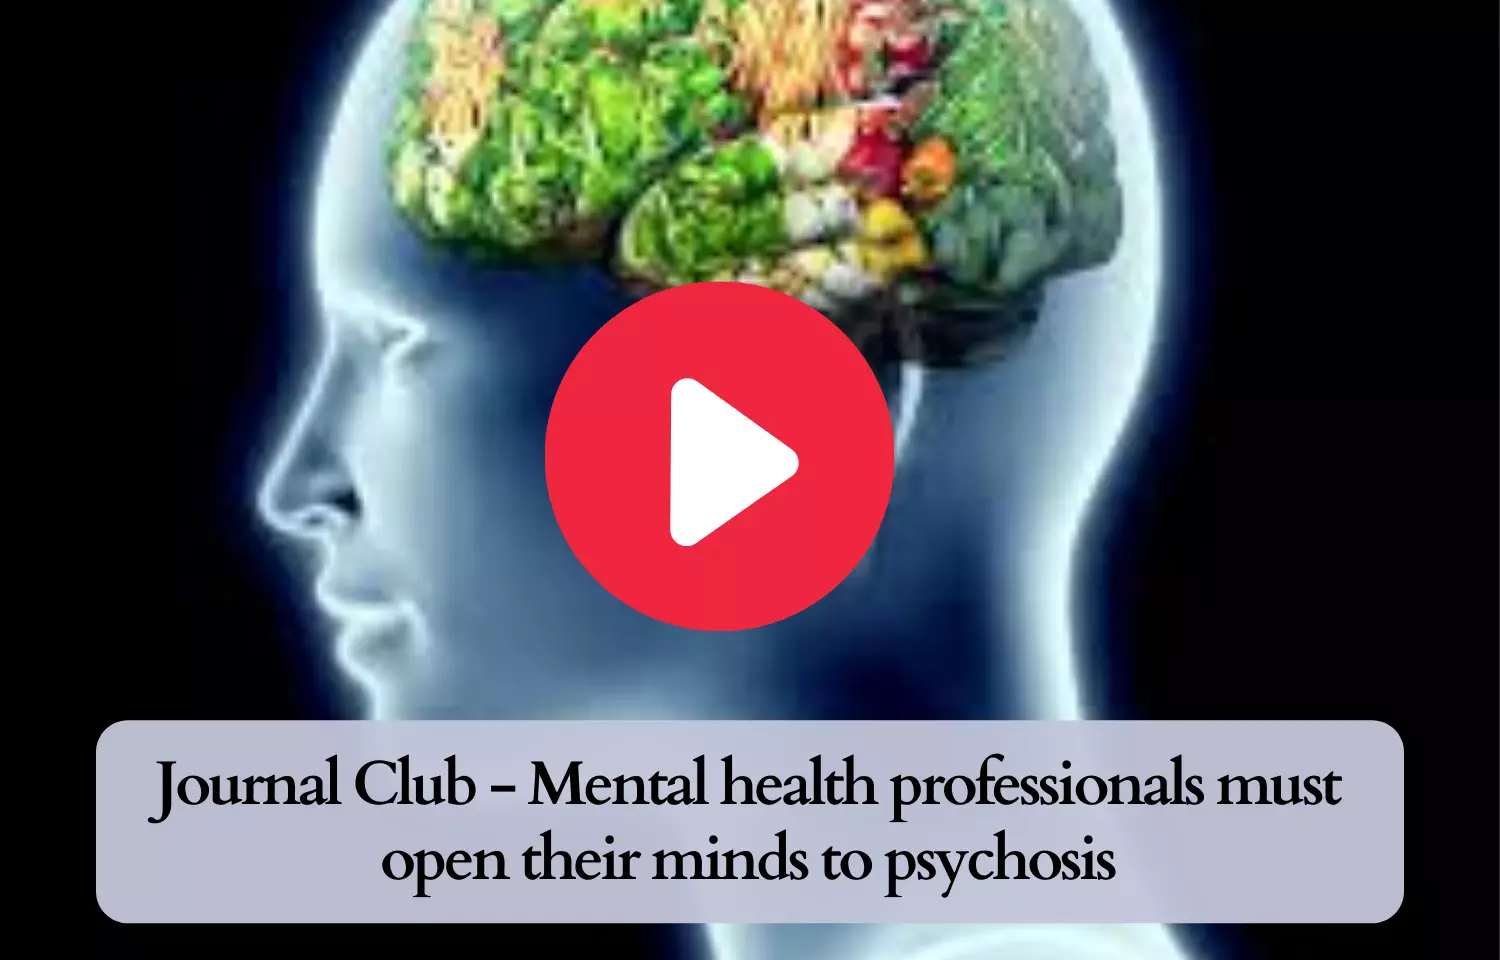 Journal Club - Mental health professionals must open their minds to psychosis